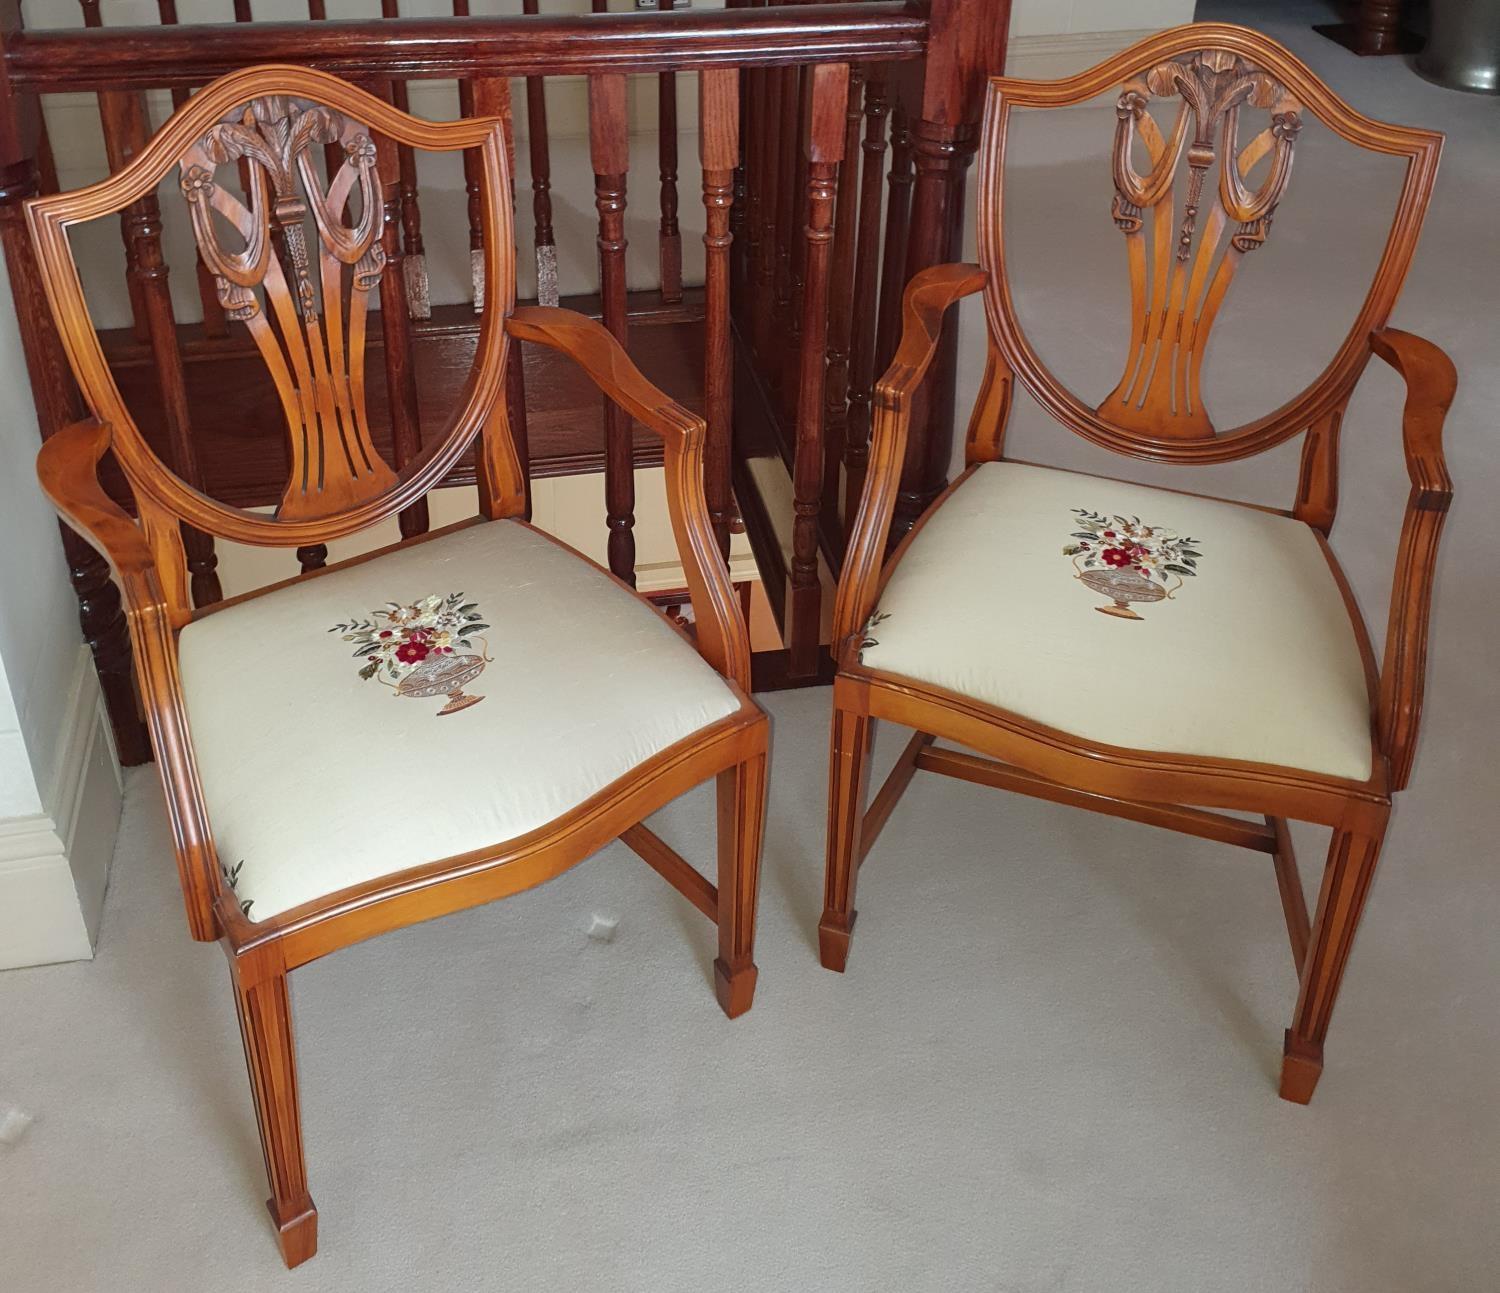 A lovely pair of Hepplewhite Carvers with Fleur de Lys backs and hand embroidered seats.